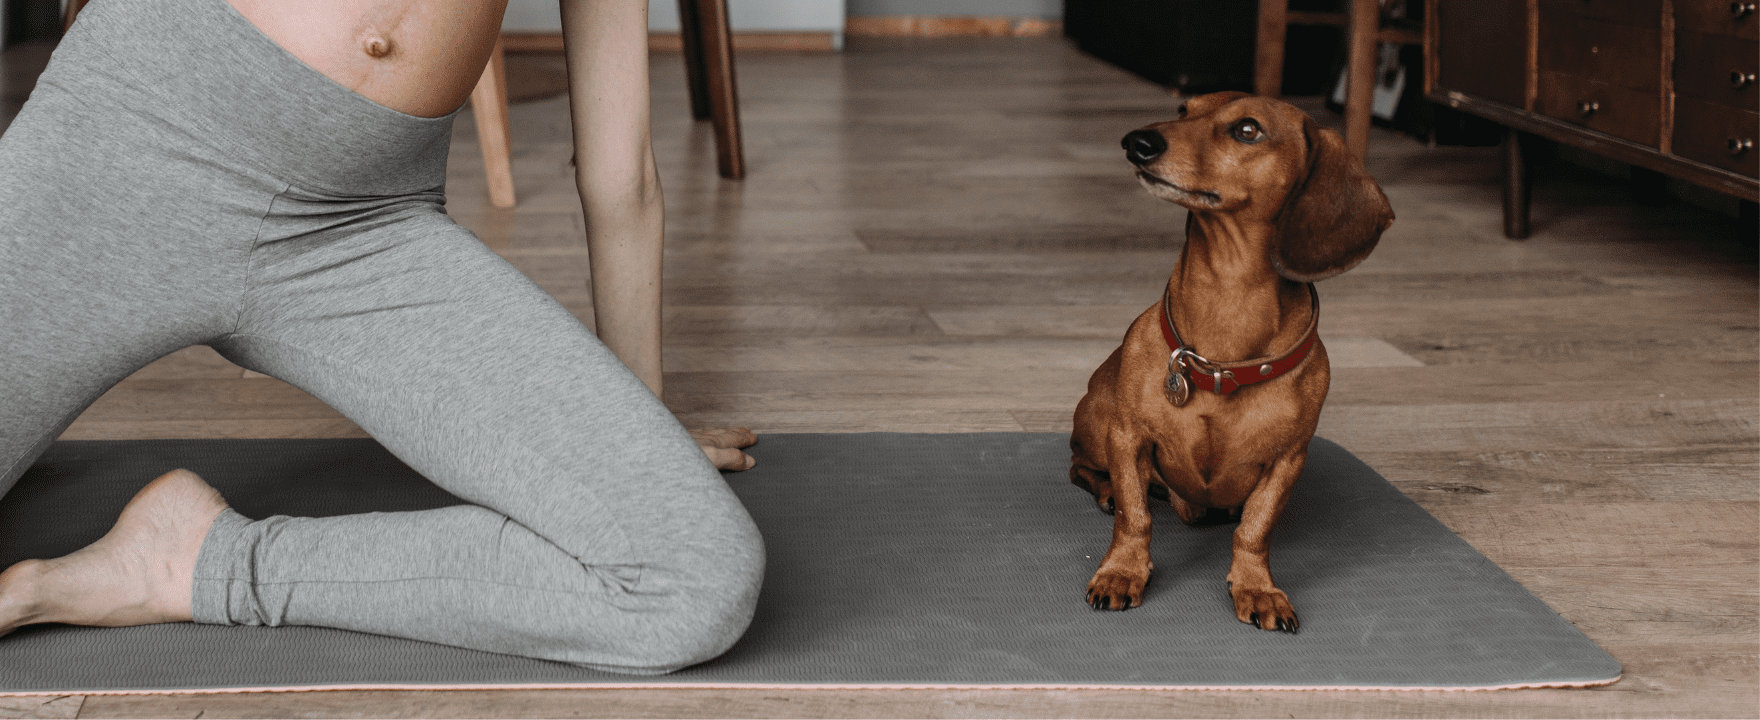 Guest Blog: 5 Ways to Exercise Your Dog When You Can't Go on a Walk